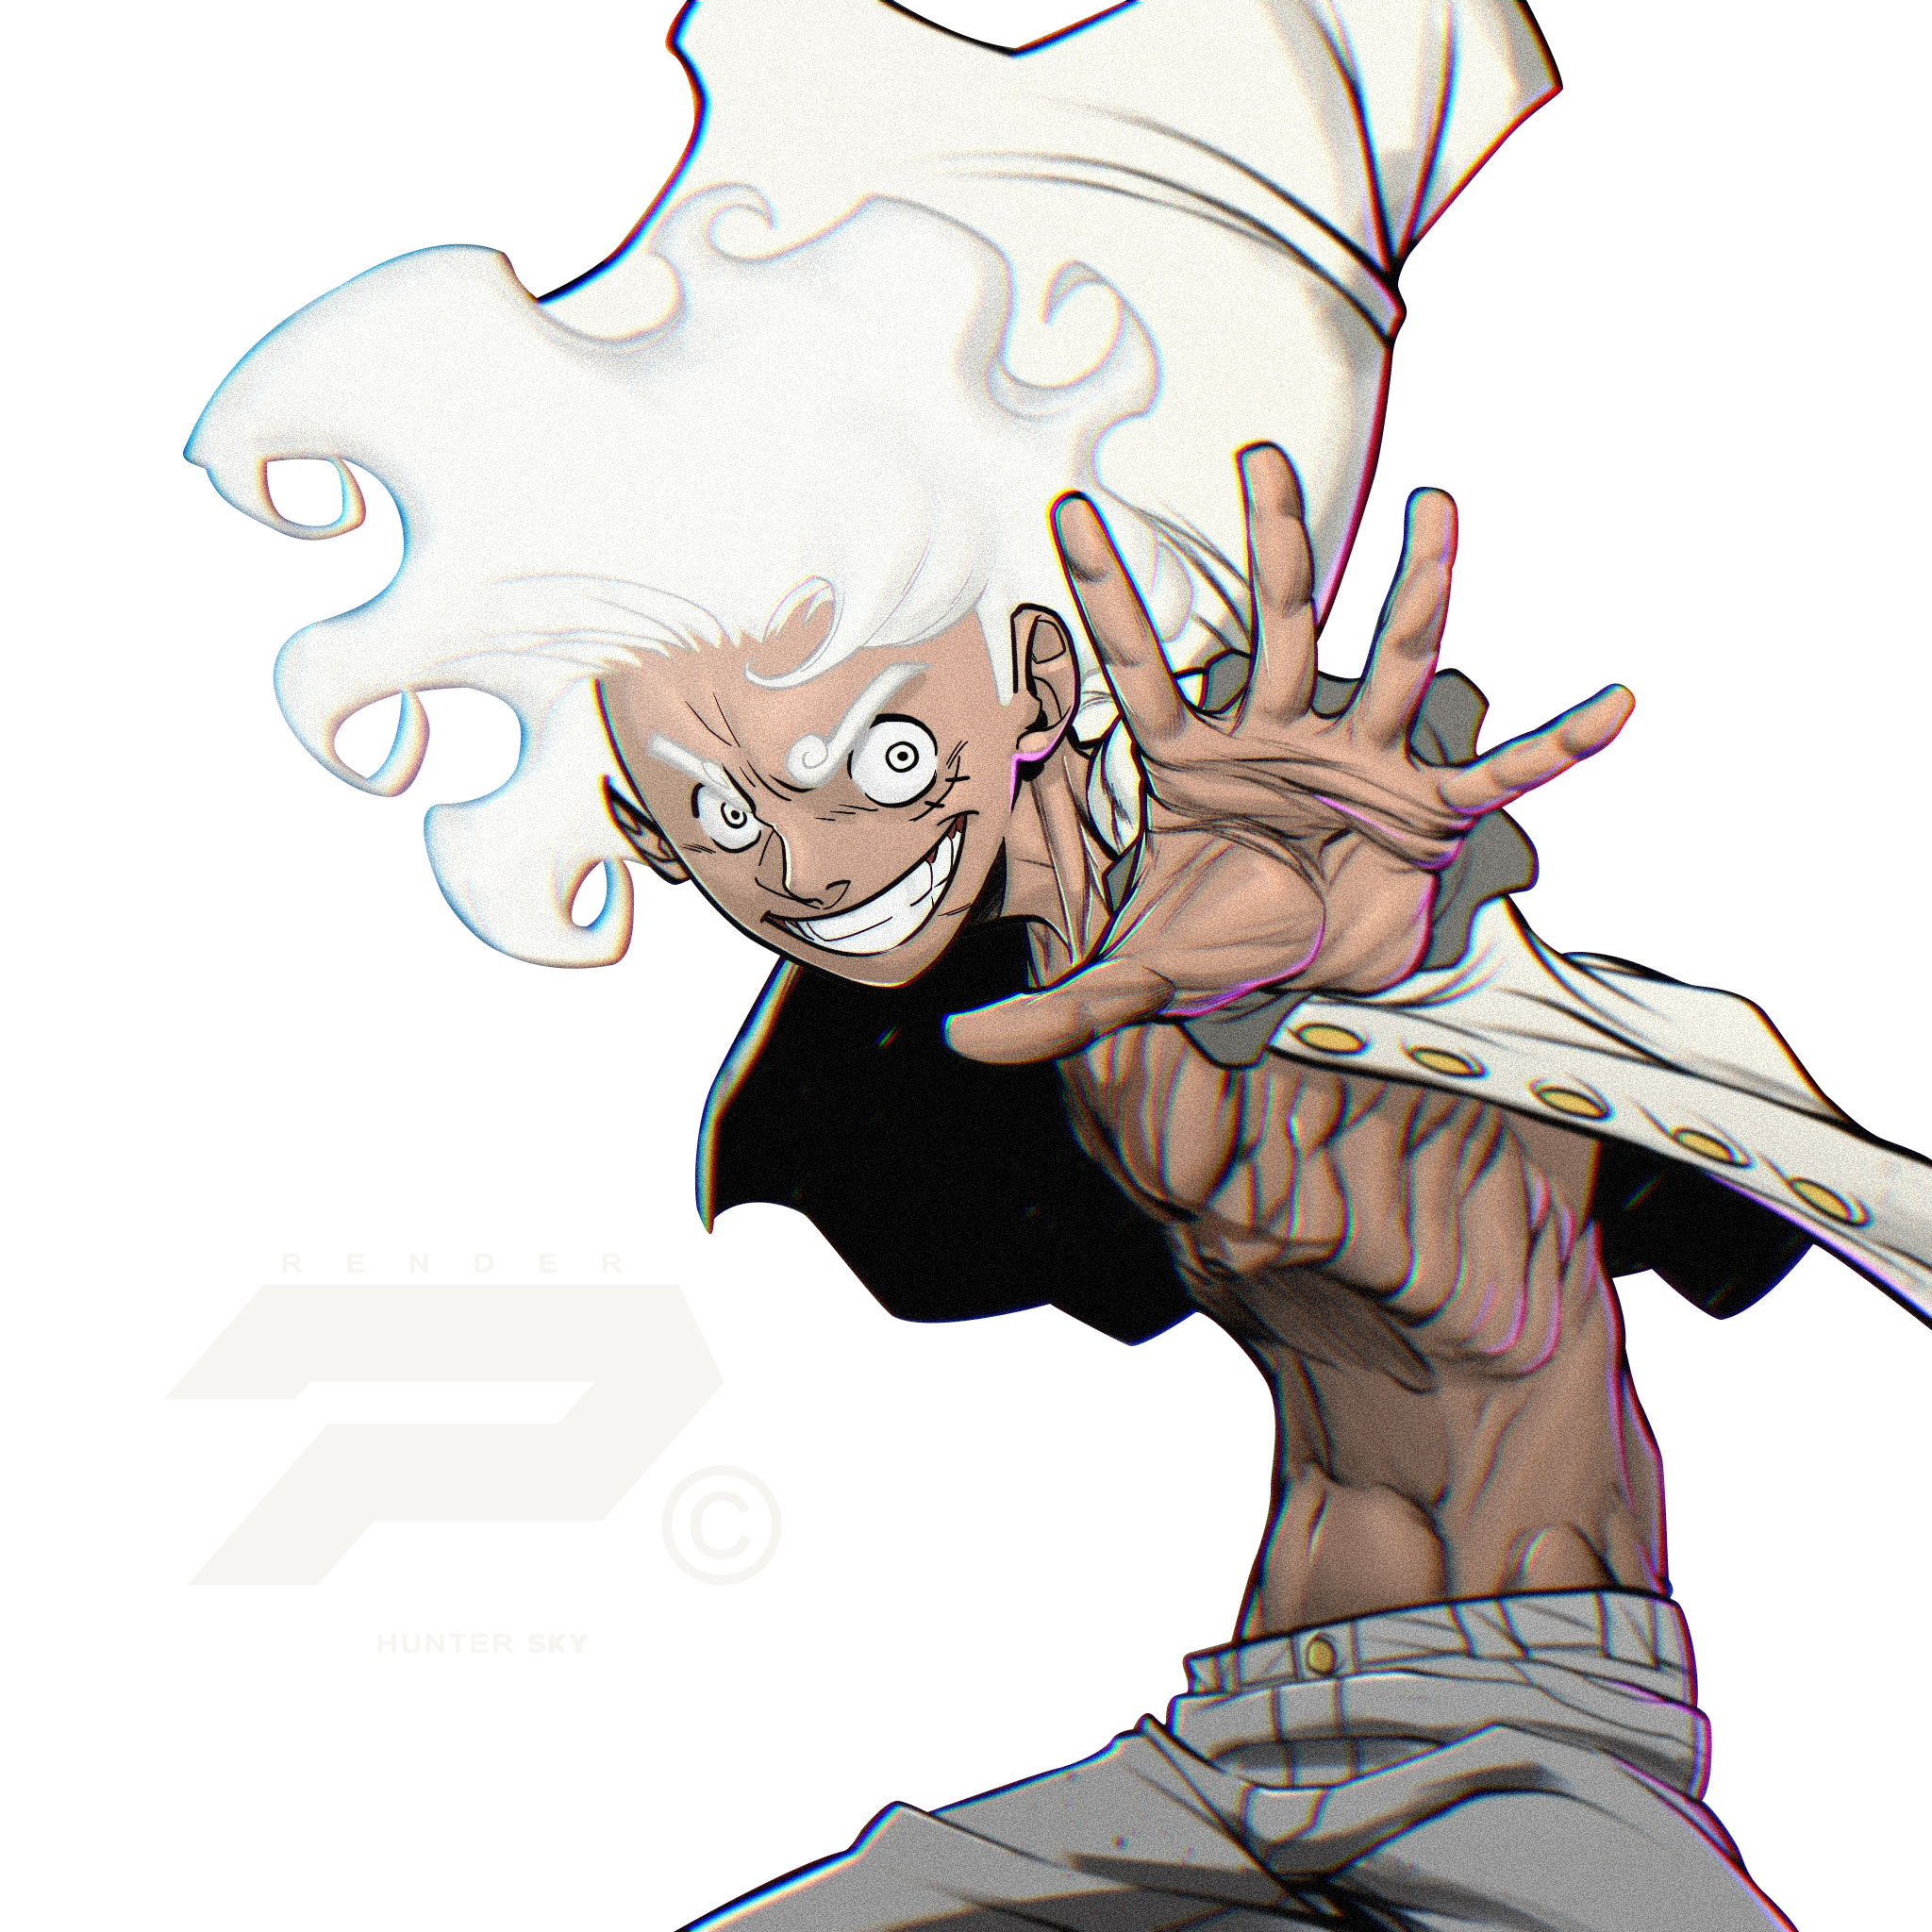 Luffy Gear 5 Colored Transparent PNG - PNGAnime